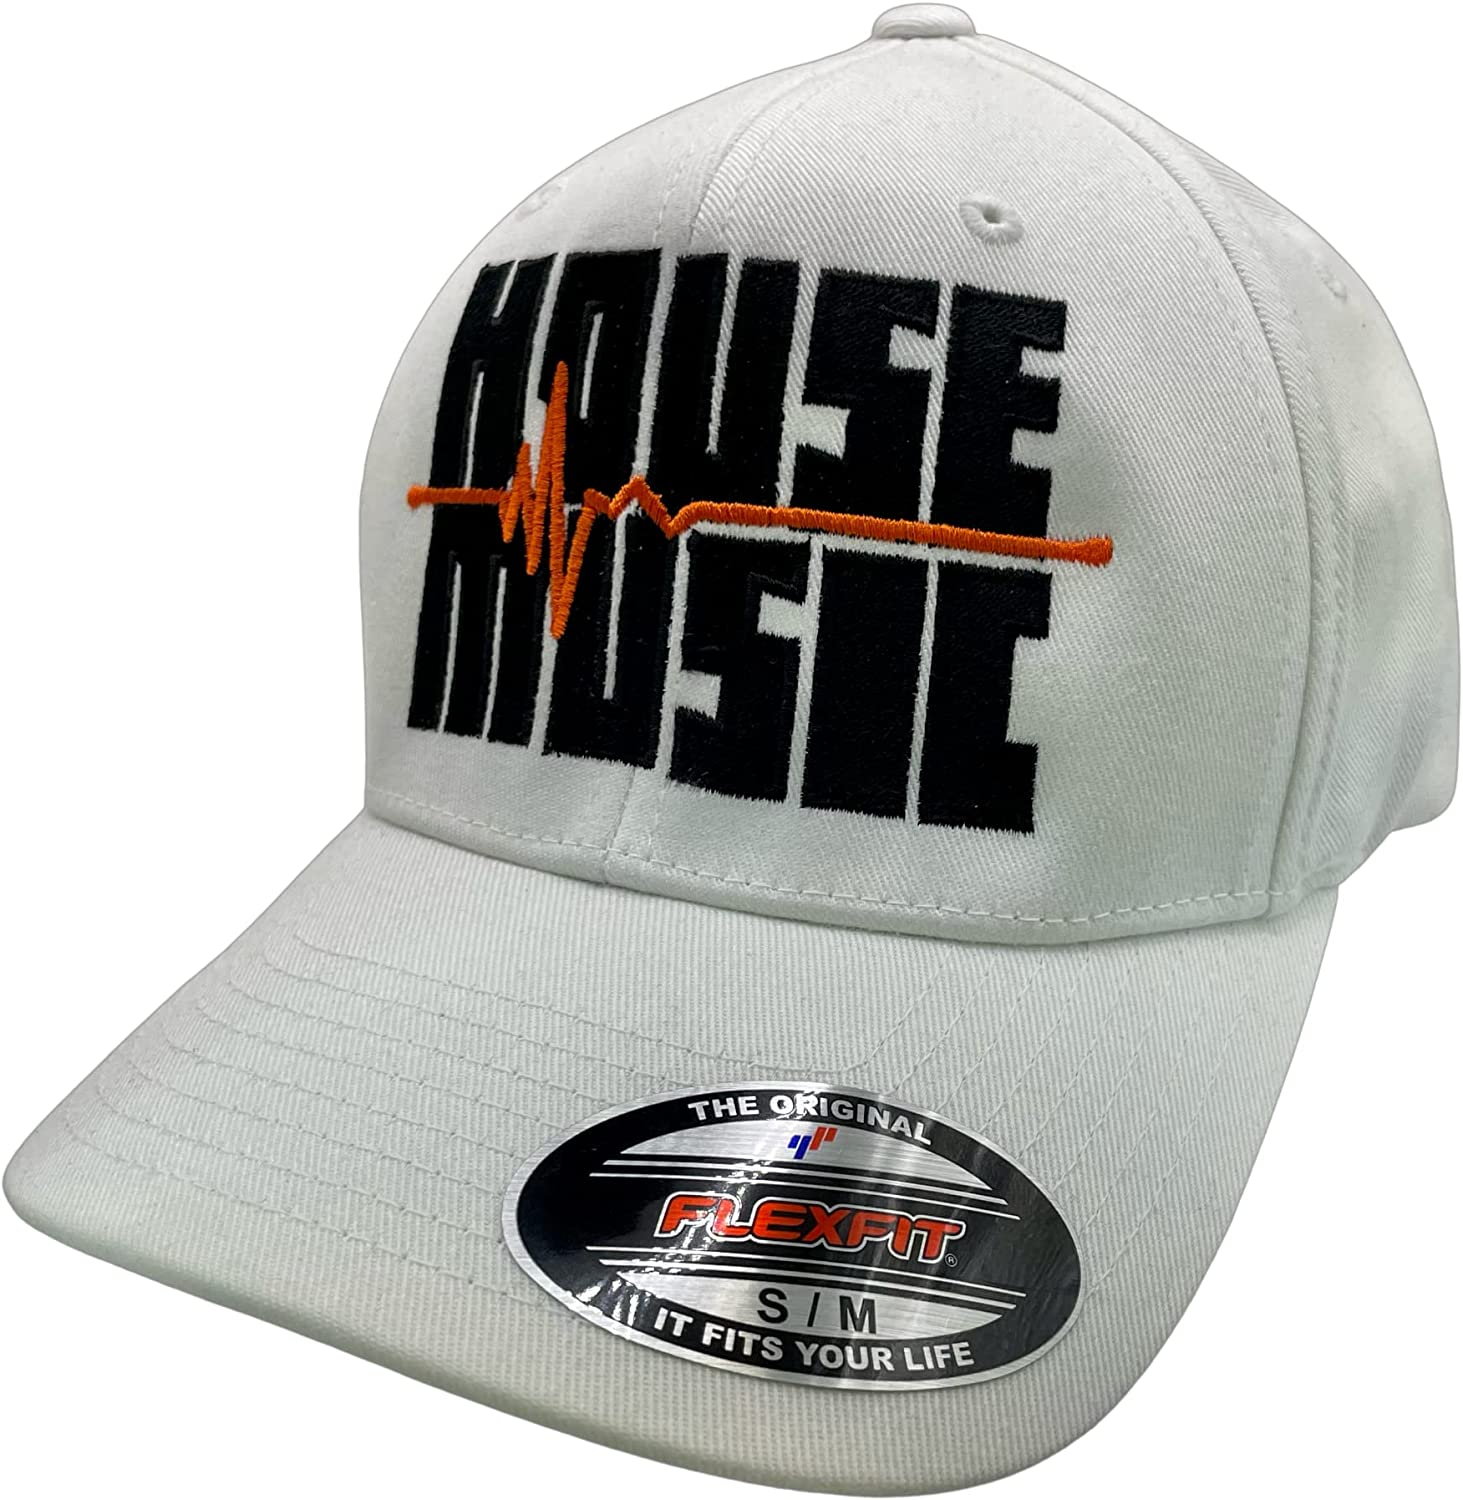 House Music Hat – White, Flex Fitted Hats by Pats Hats (Large/Extra Large)